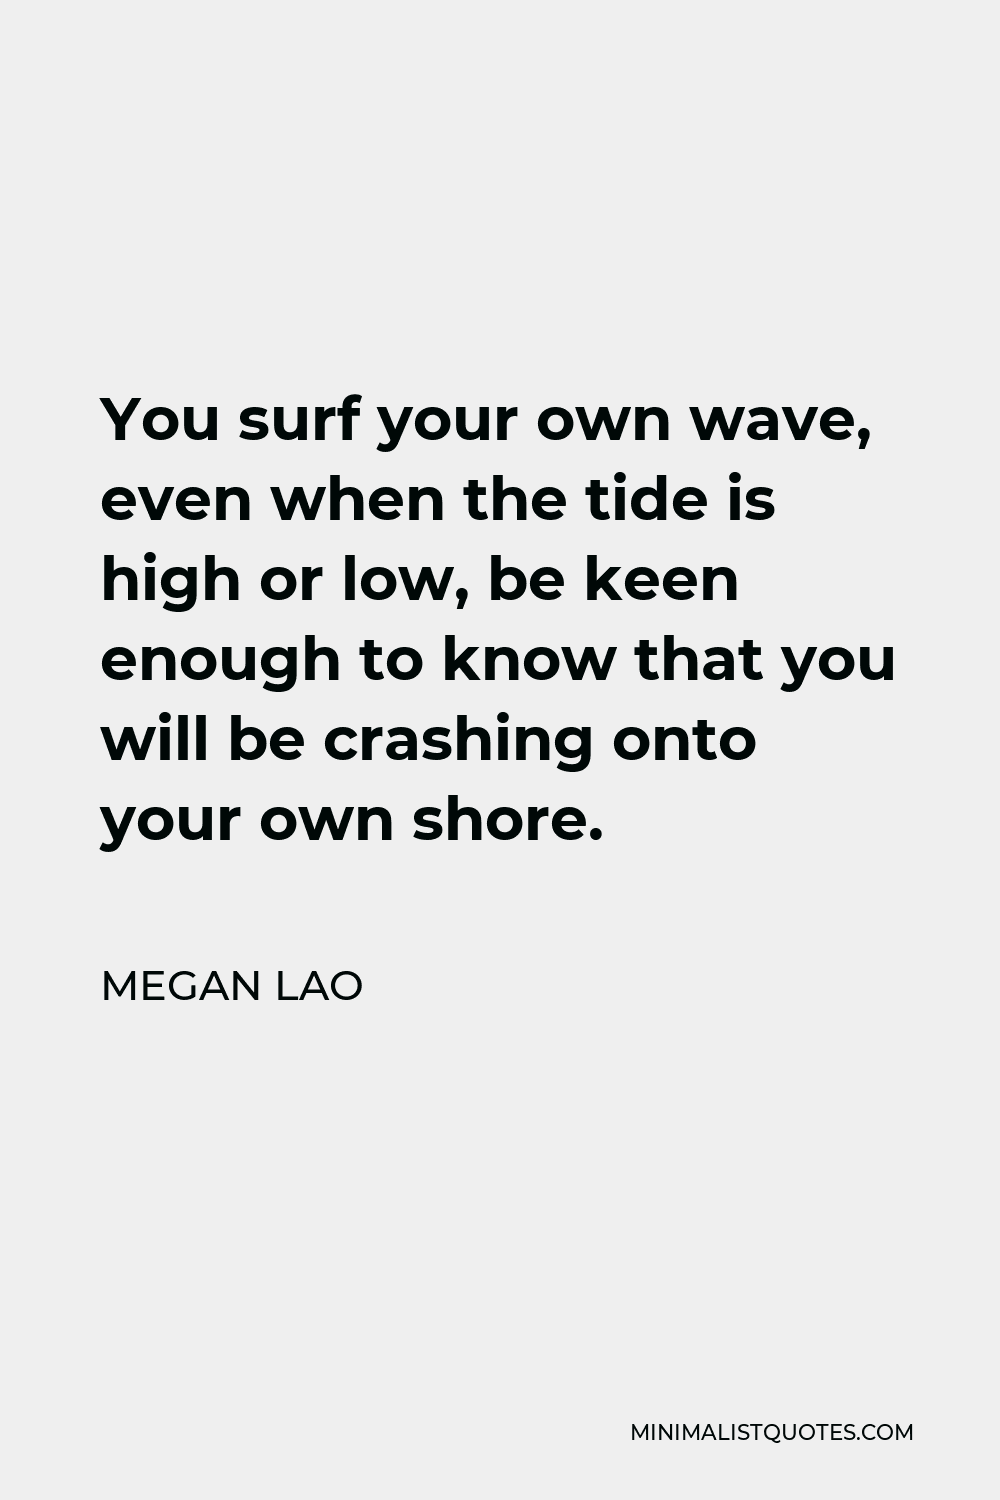 Megan Lao Quote - You surf your own wave, even when the tide is high or low, be keen enough to know that you will be crashing onto your own shore.